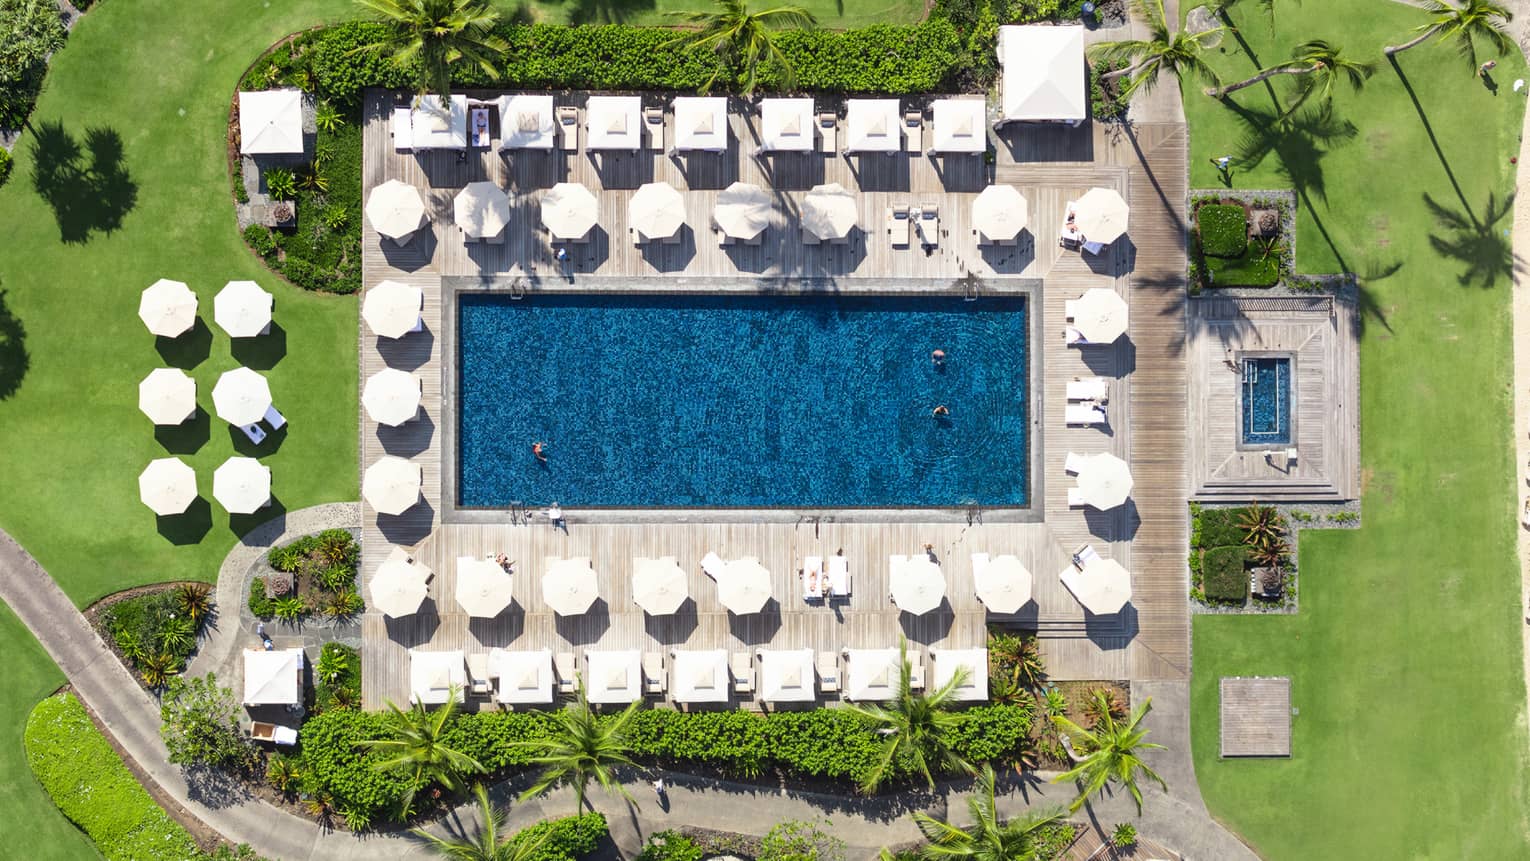 Aerial shot of large rectangular pool surrounded by white umbrellas, cabanas and green lawn